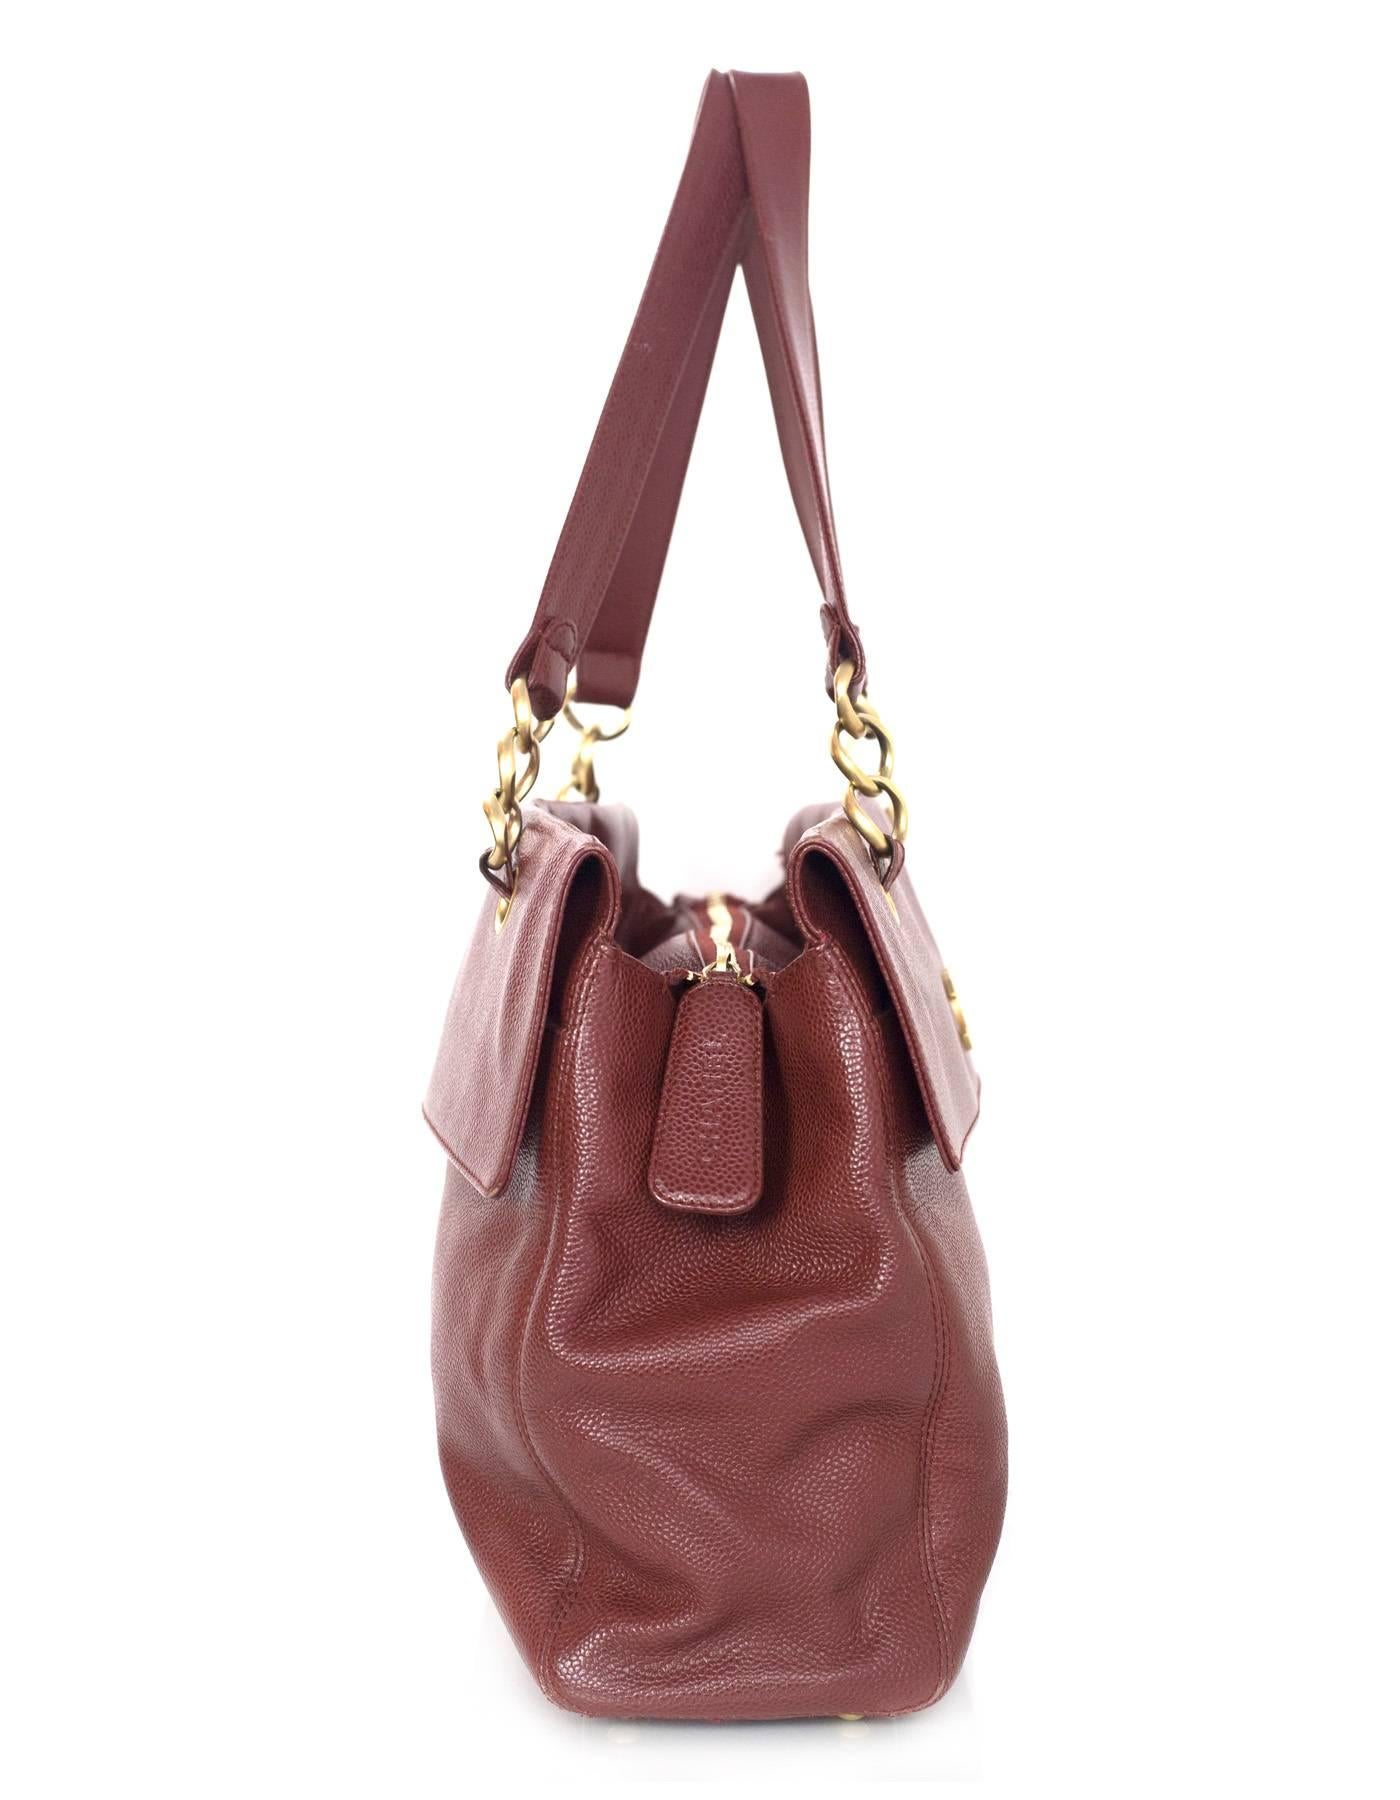 Chanel Burgundy Caviar Tote 
Features goldtone CC pendant on front of bag

Made In: Italy
Year of Production: 2003-2004
Color: Burgundy
Hardware: Goldtone
Materials: Caviar leather
Lining: Burgundy silk-blend fabric
Closure/Opening: Zip across